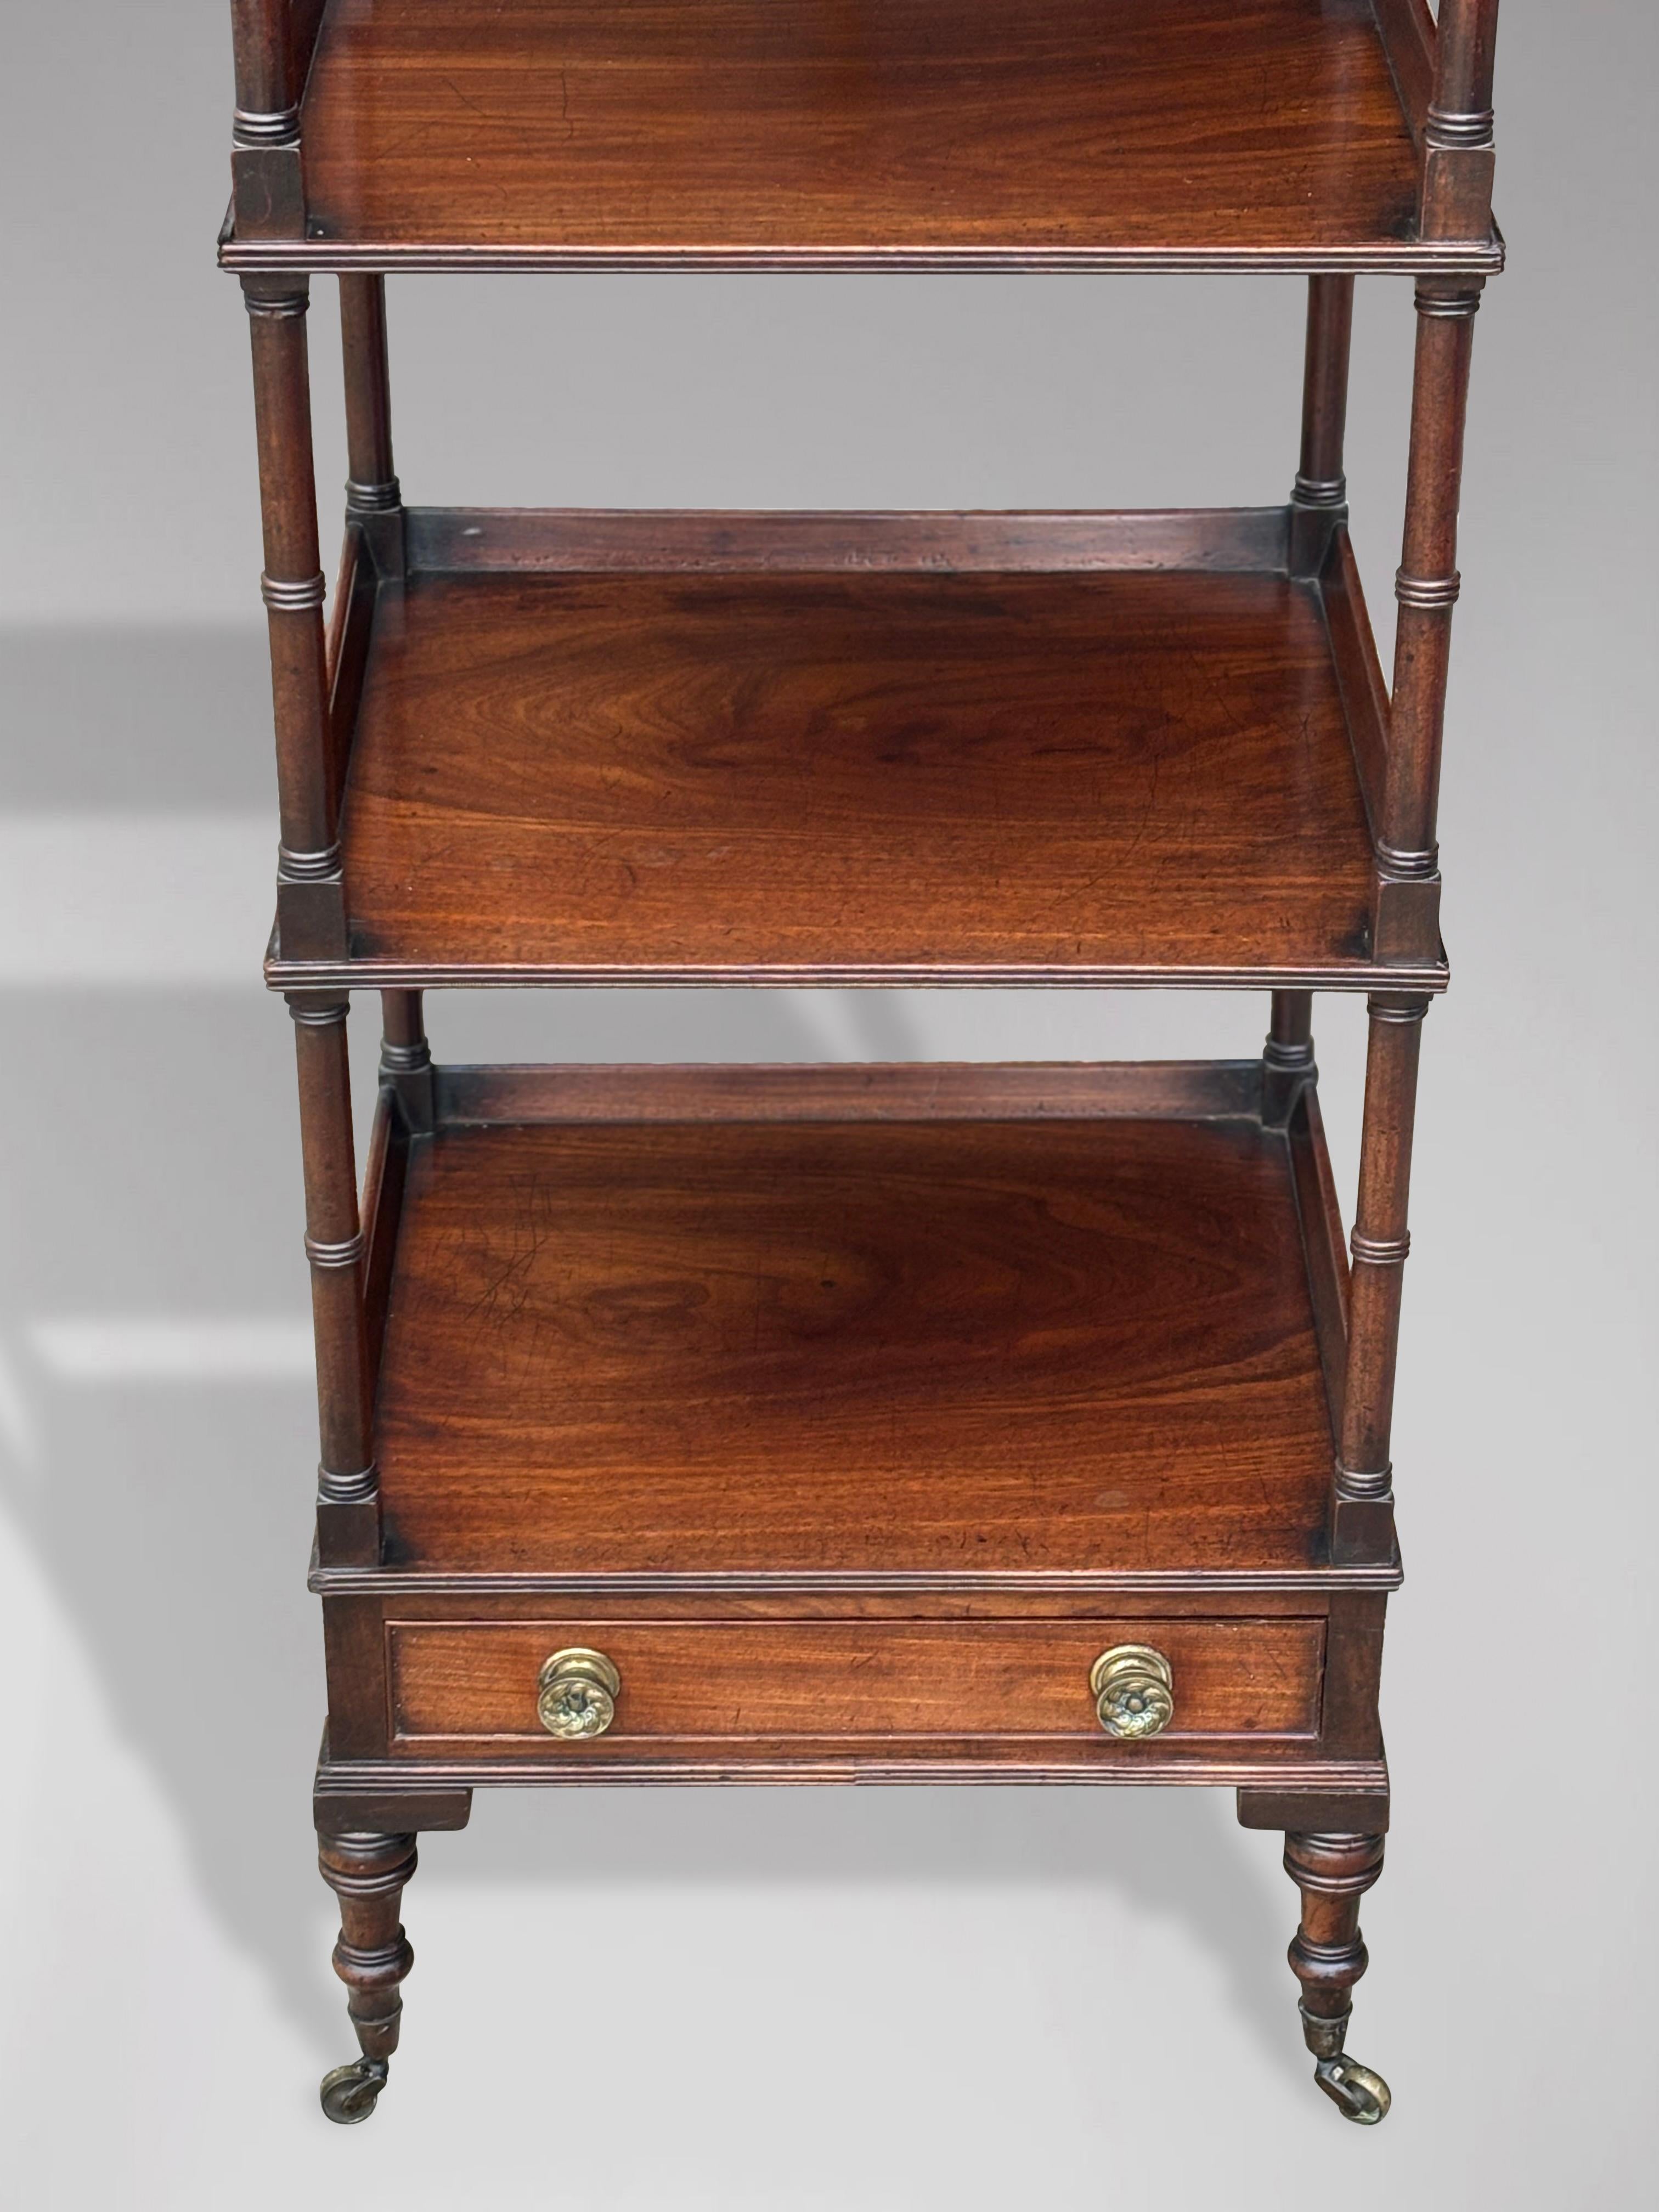 19th Century Regency Period Mahogany Whatnot or Display Stand In Good Condition For Sale In Petworth,West Sussex, GB